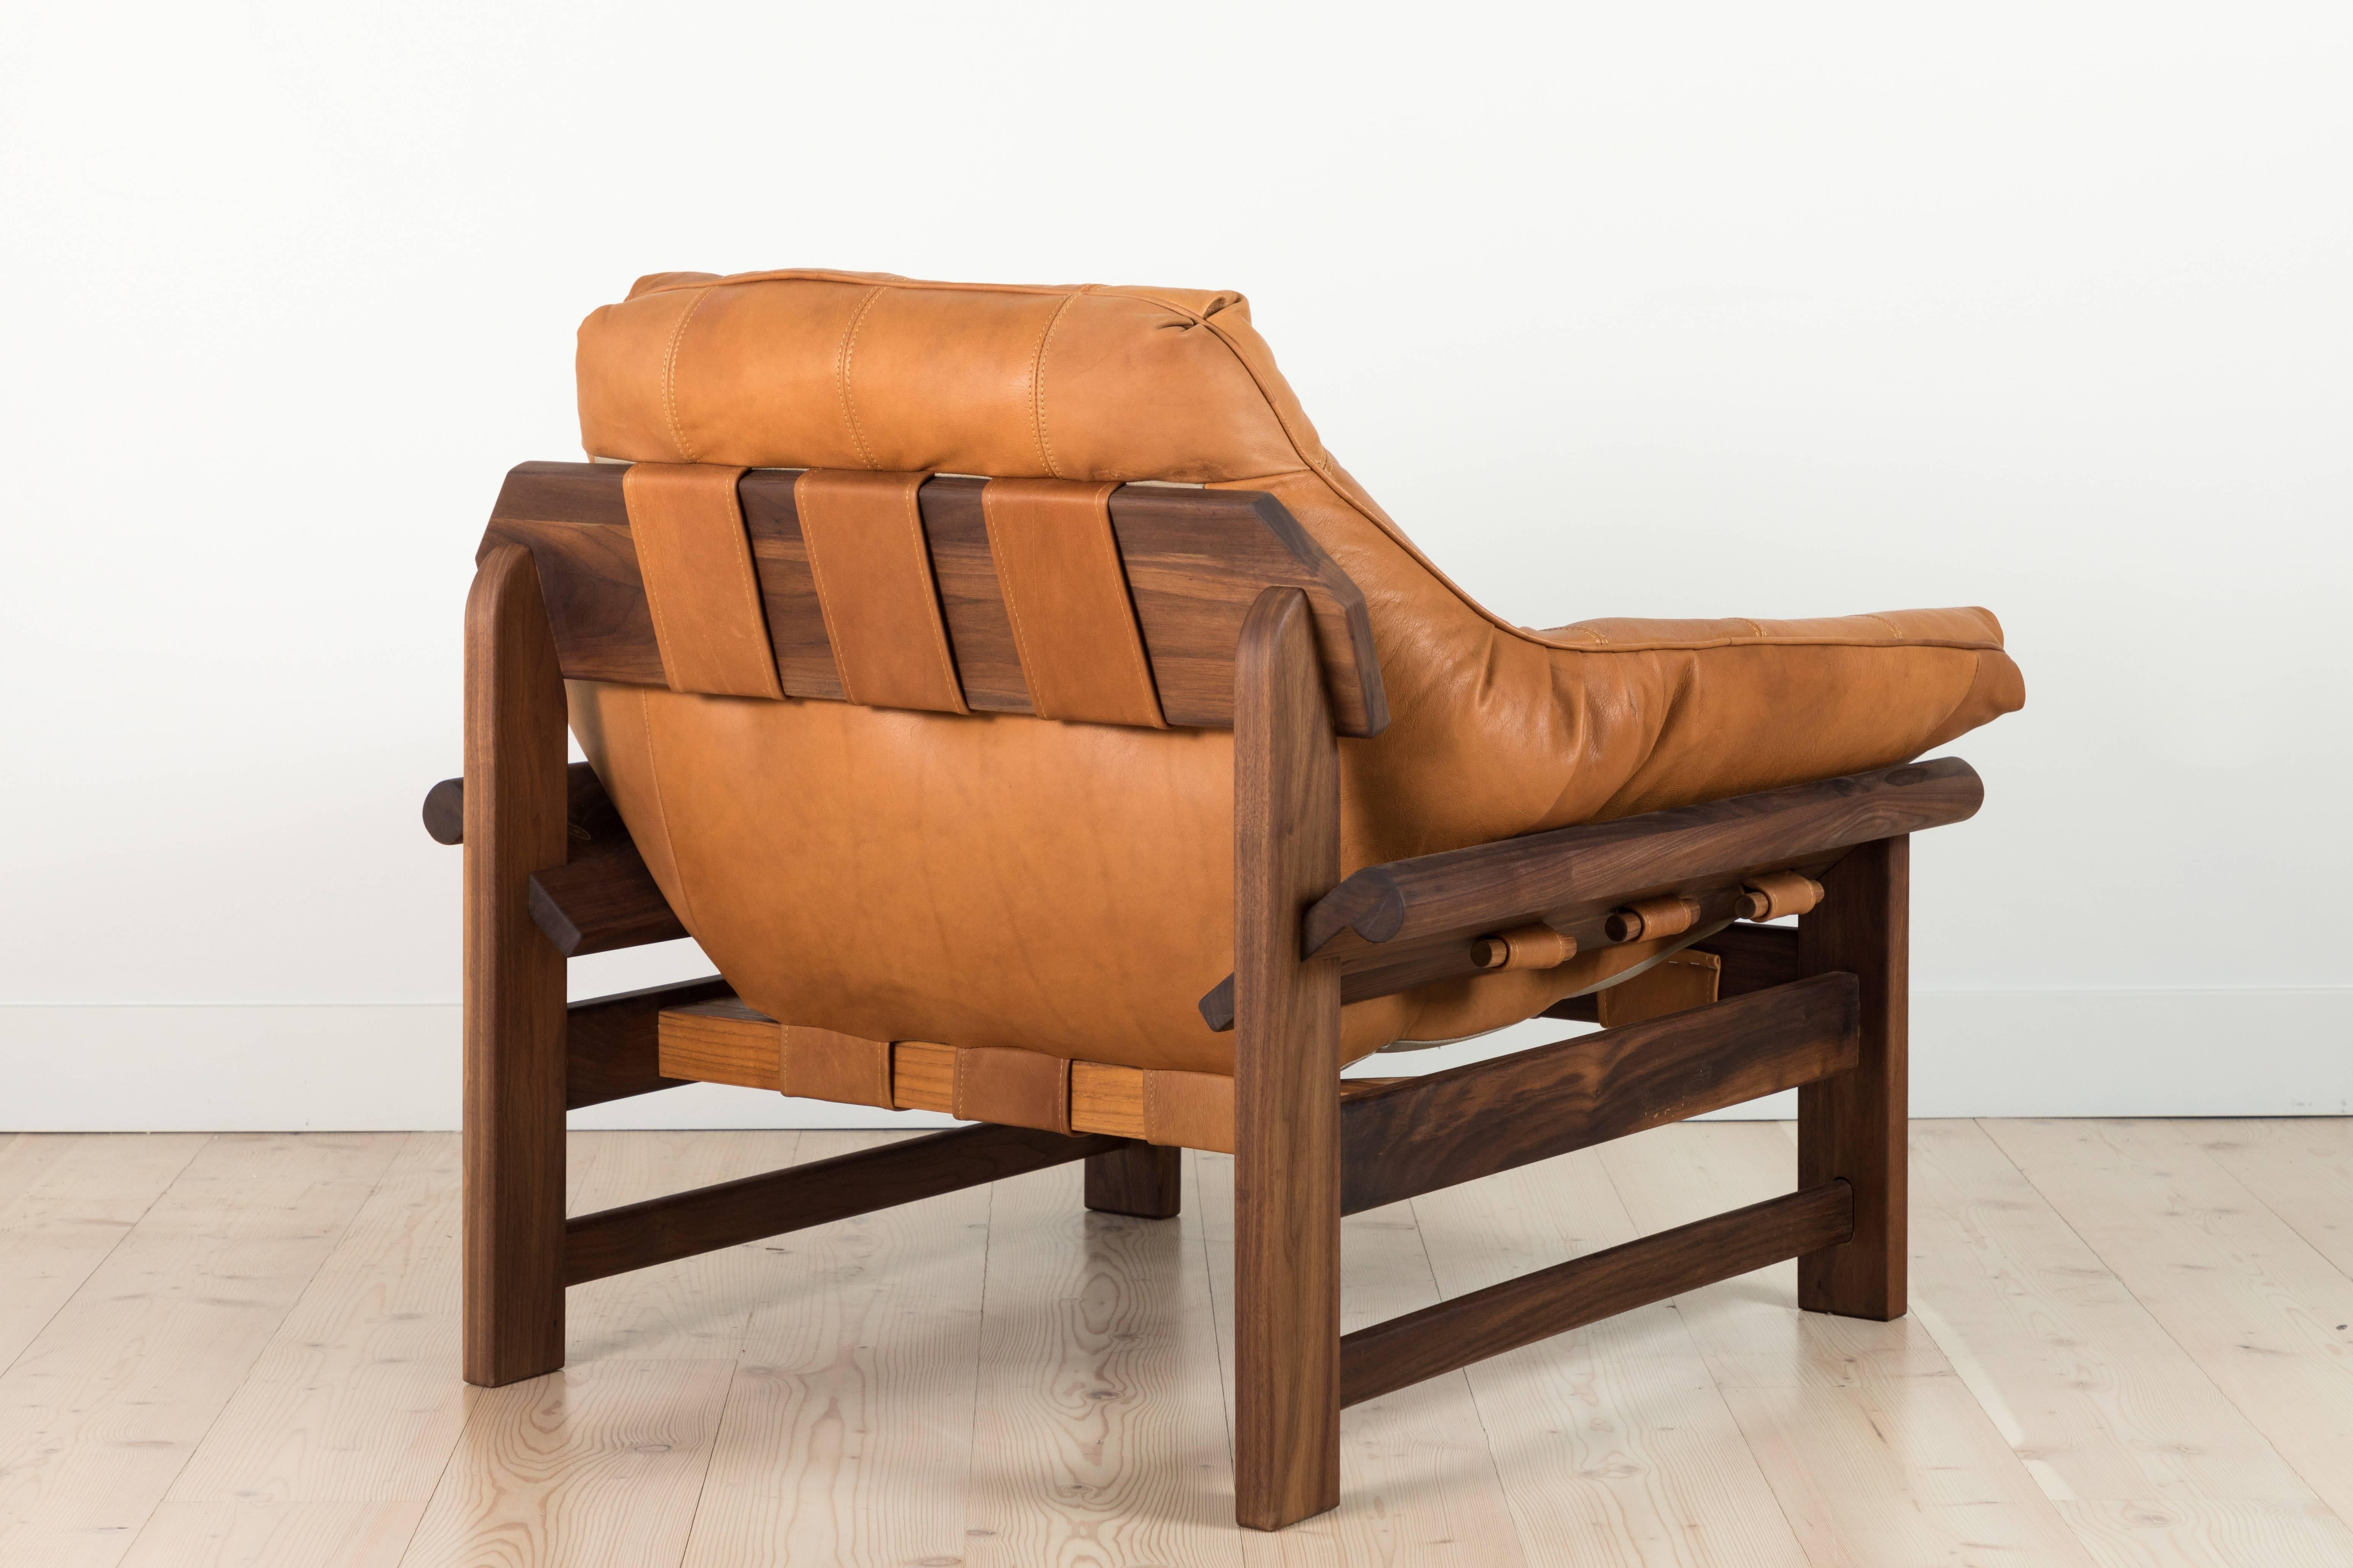 Pair of Leather and Oiled Walnut Ojai Lounge Chairs by Lawson-Fenning 2